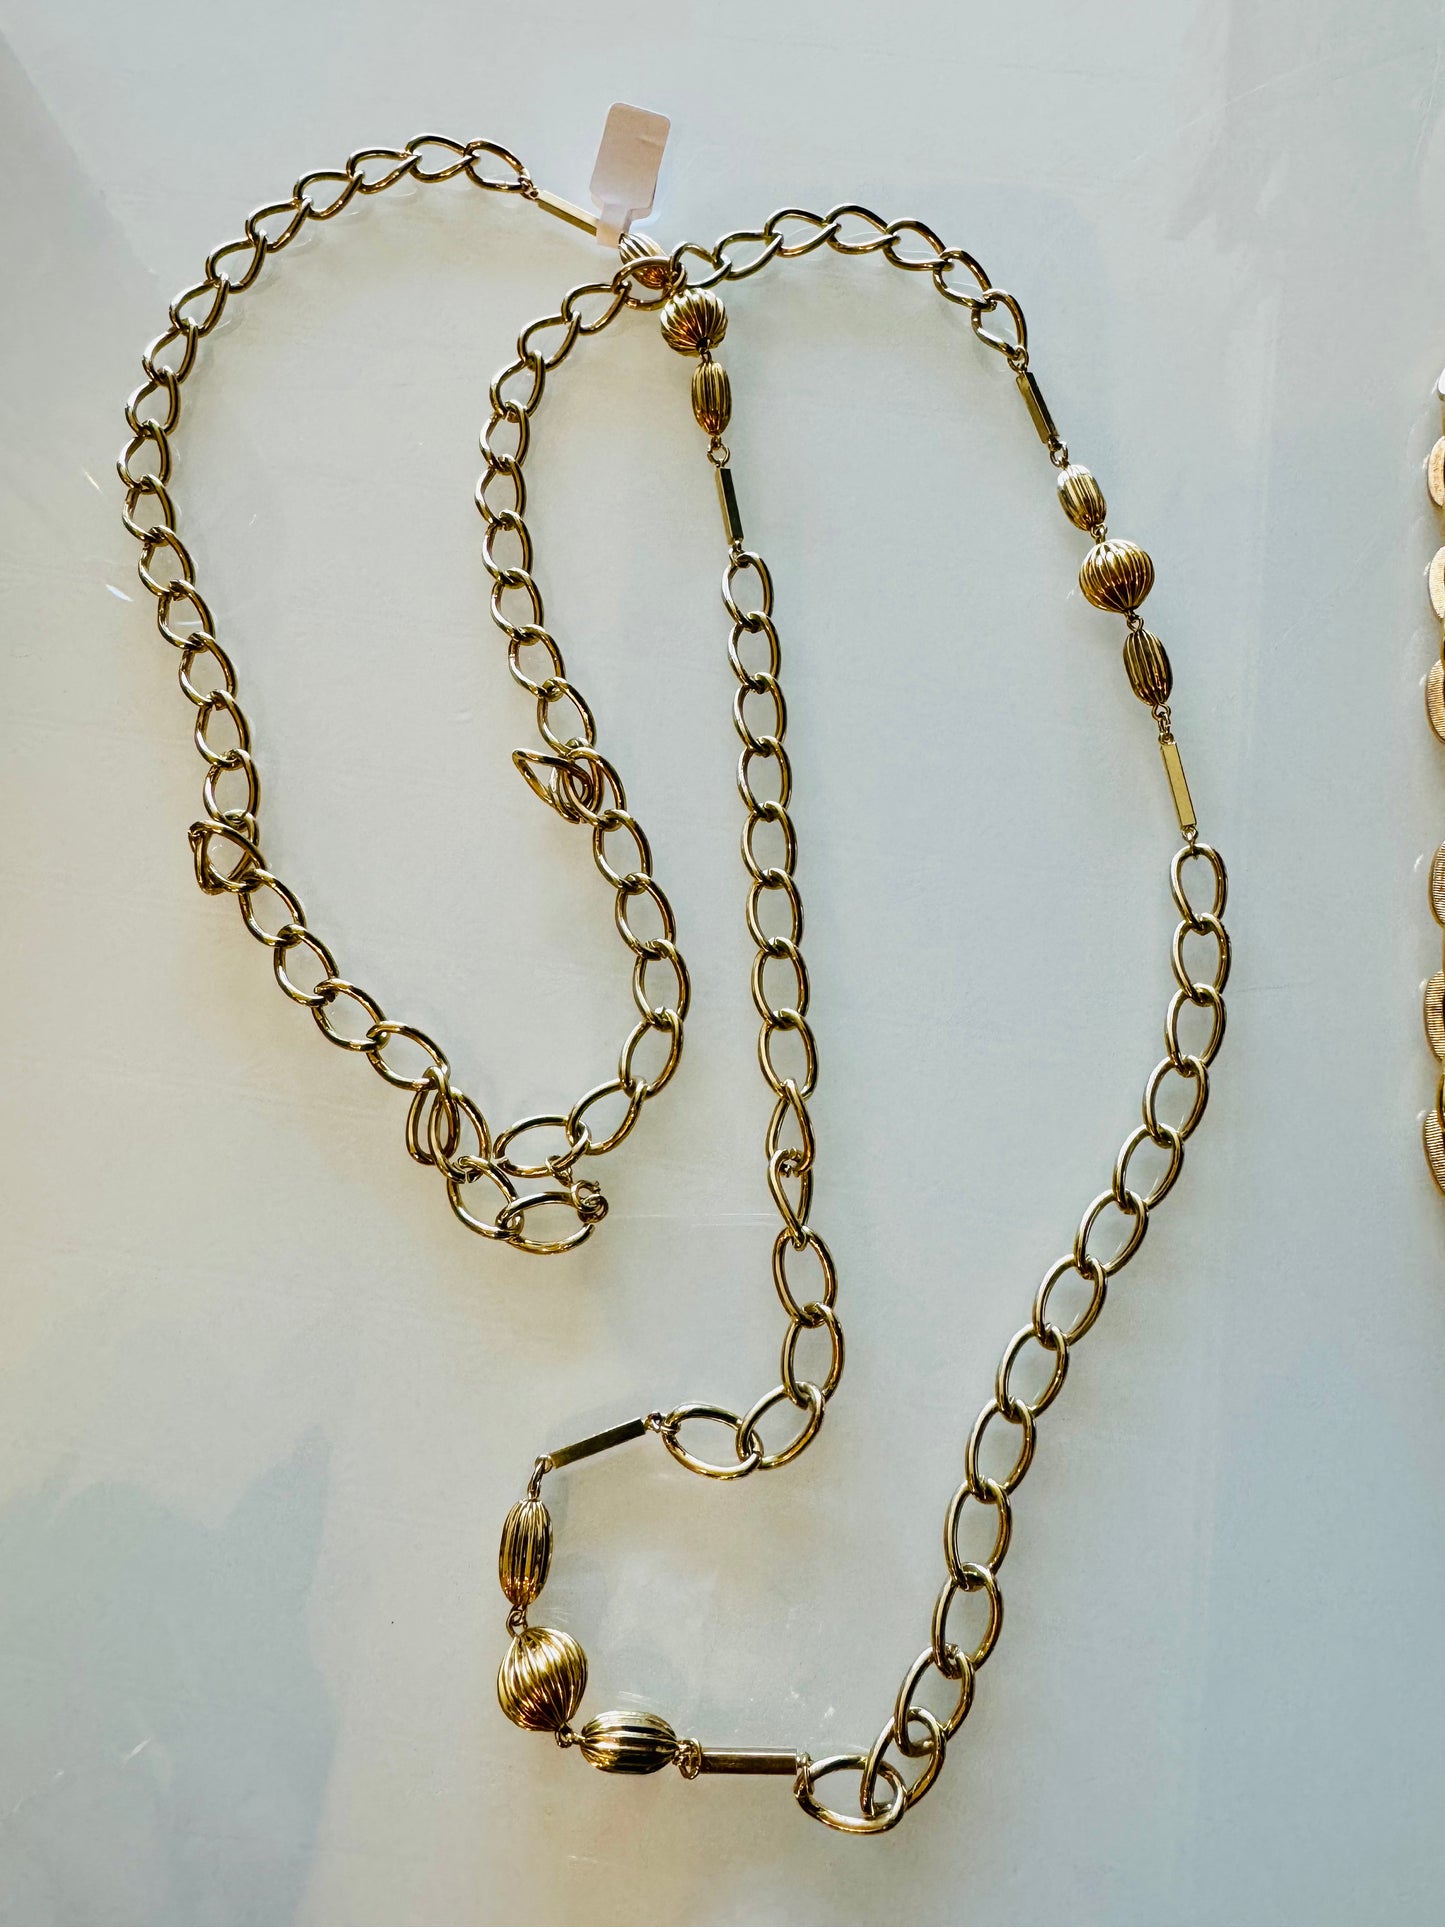 Great vintage layering chain. Or use it to convert your clutch into a chic shoulder bag